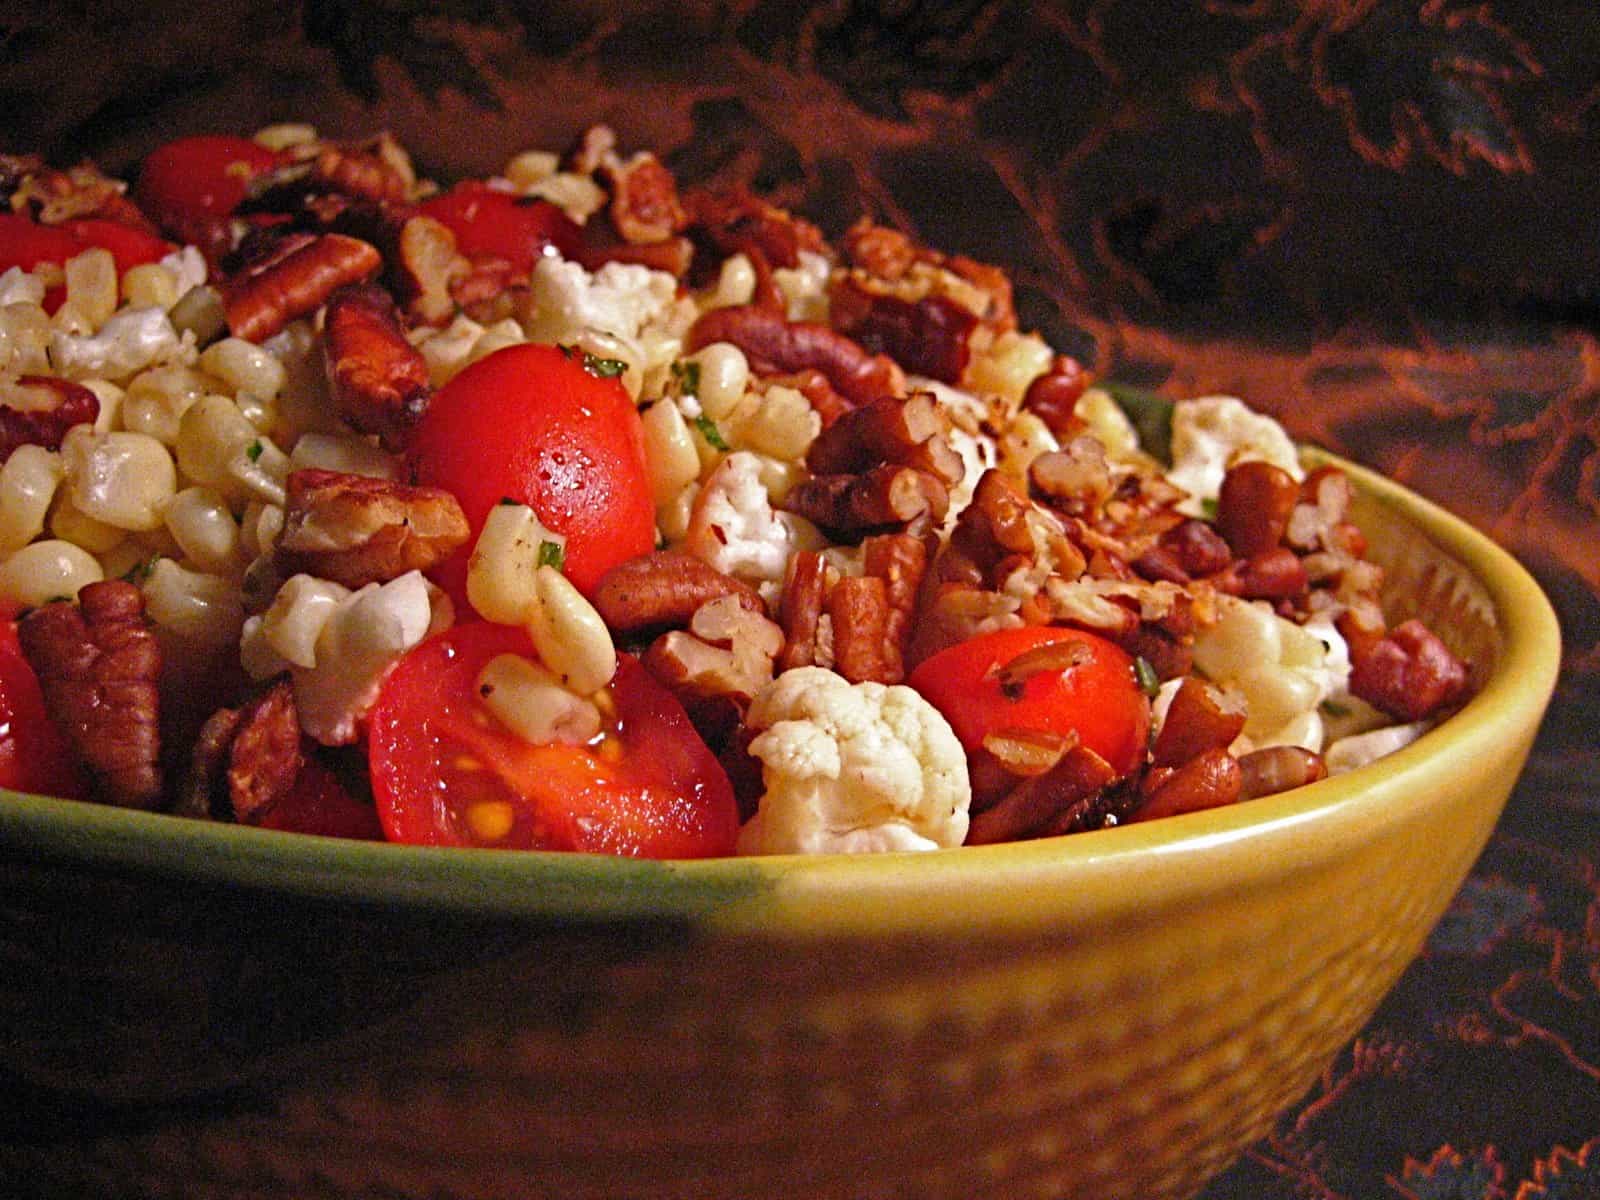 Corn Salad with Pecan Dressing topped with pecan pieces in a decorative corn bowl